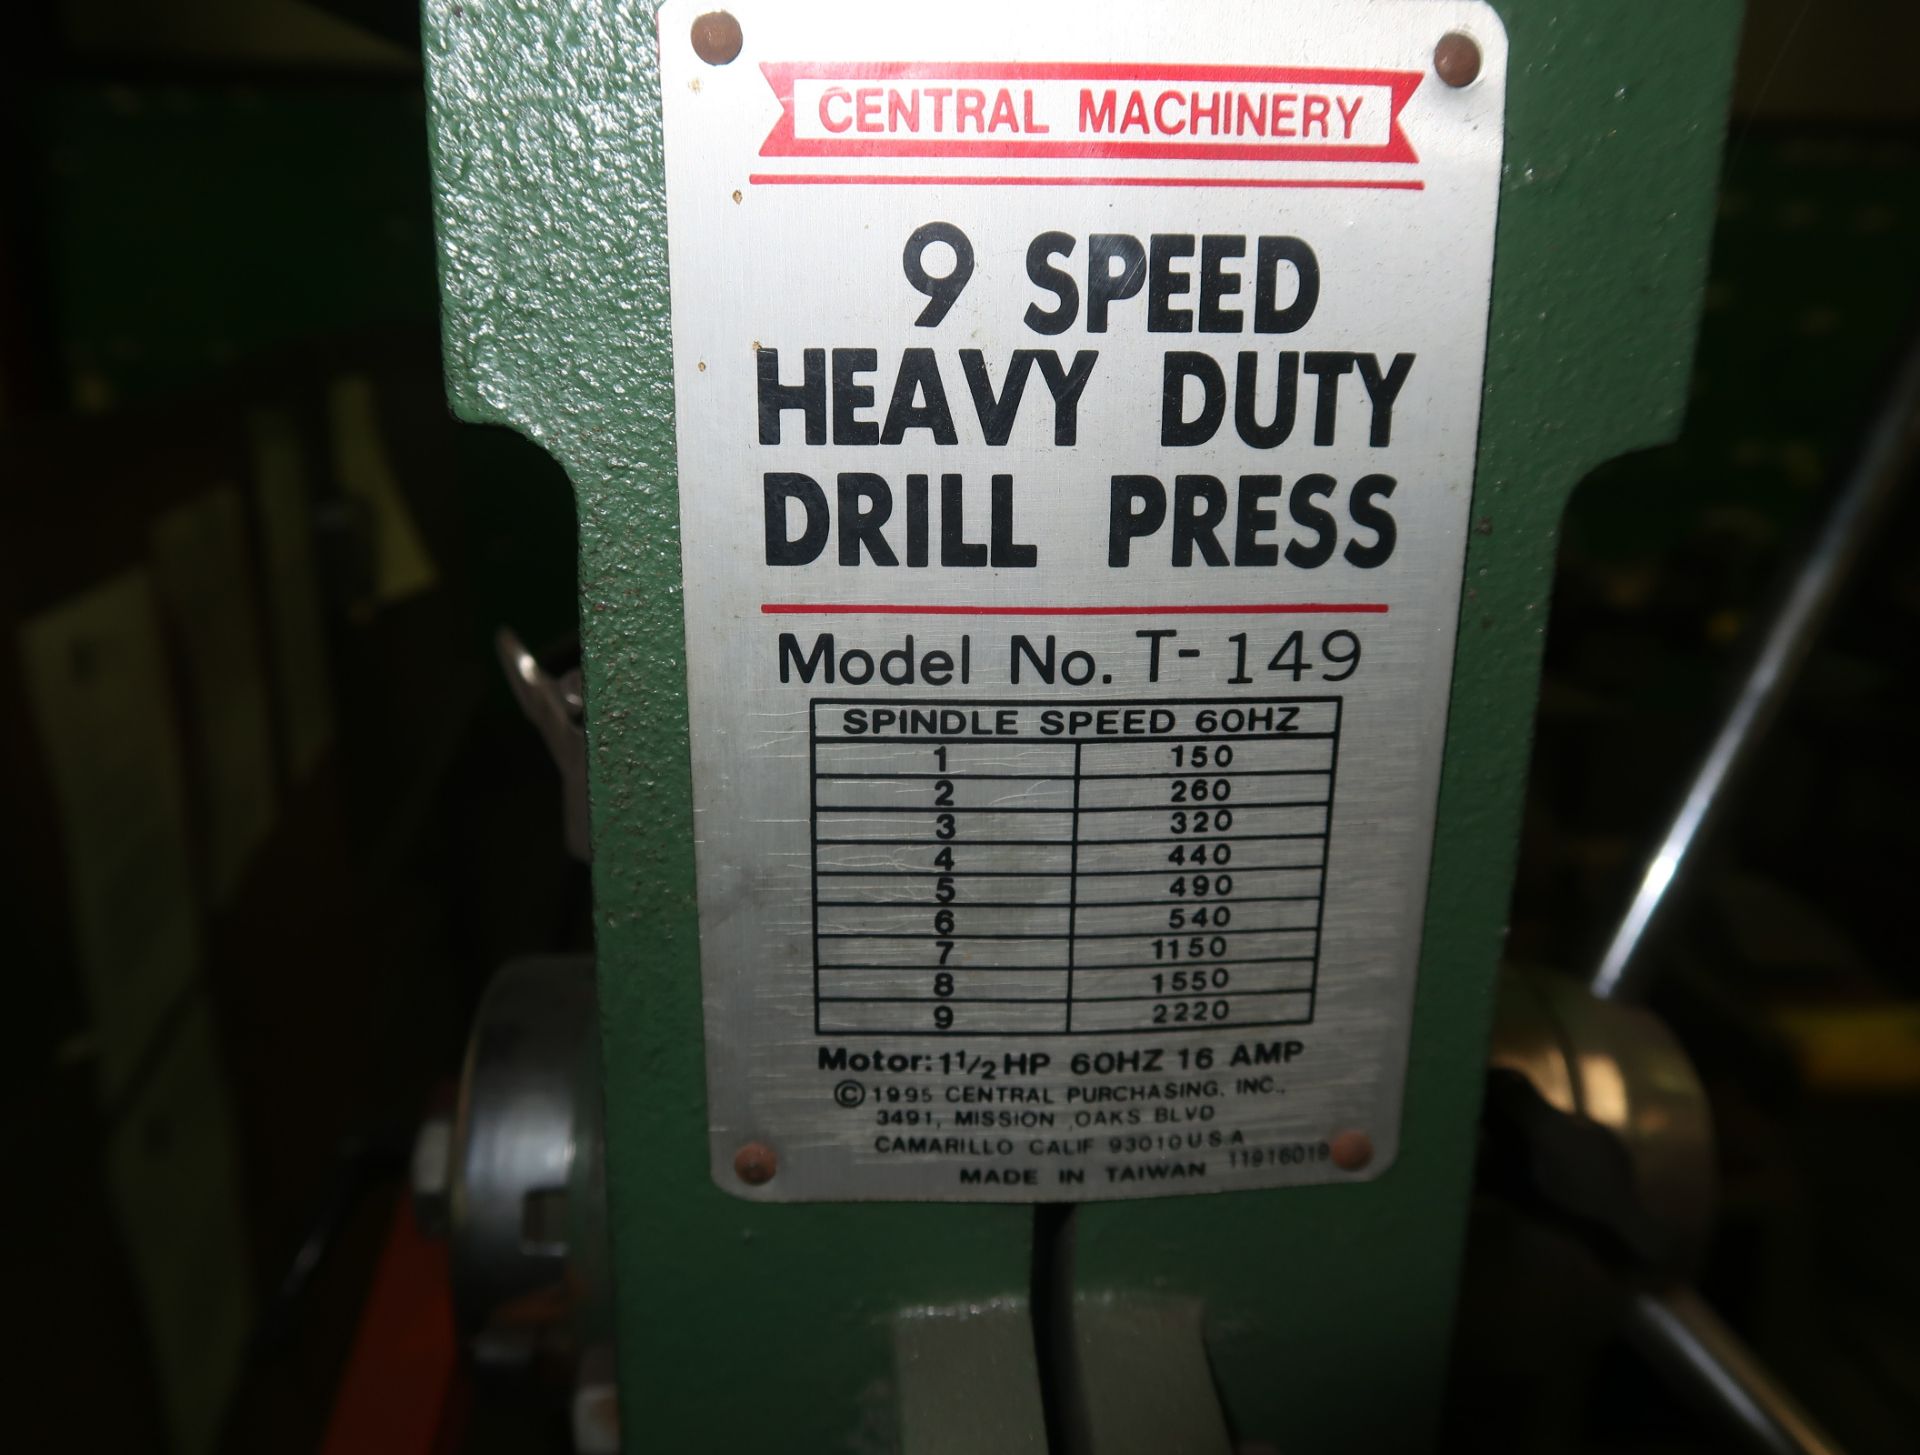 CENTRAL MACHINERY 9-SPEED DRILL H.D. DRILL PRESS, MDL. T-149, CHUCK, 120V, 1.5HP - Image 2 of 2